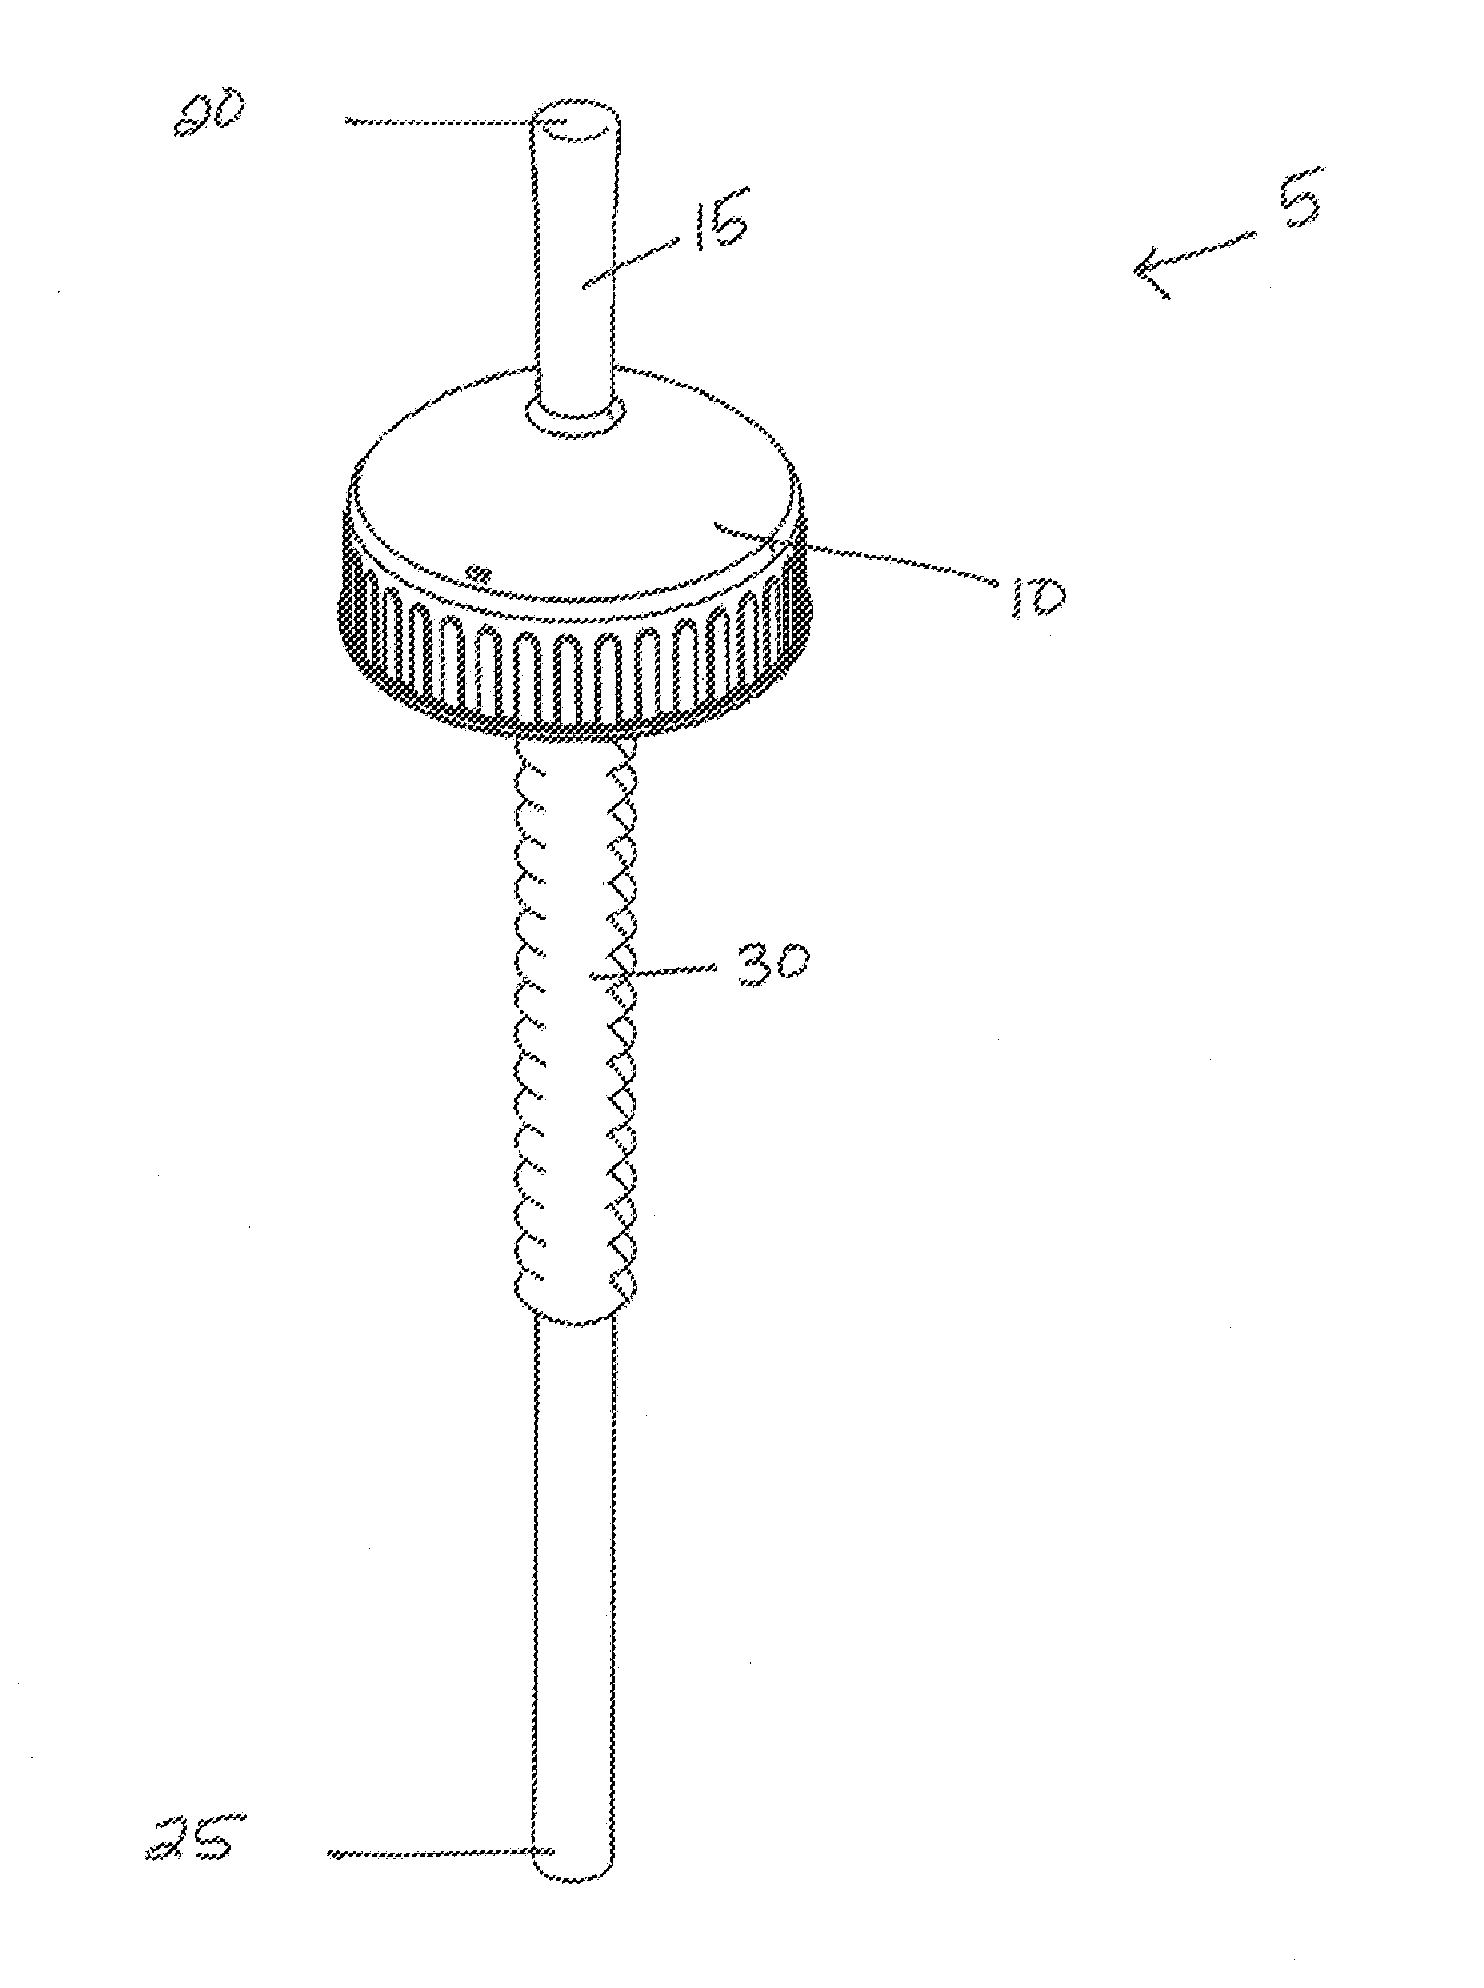 Accessory and spill-proof cap for bottled beverage